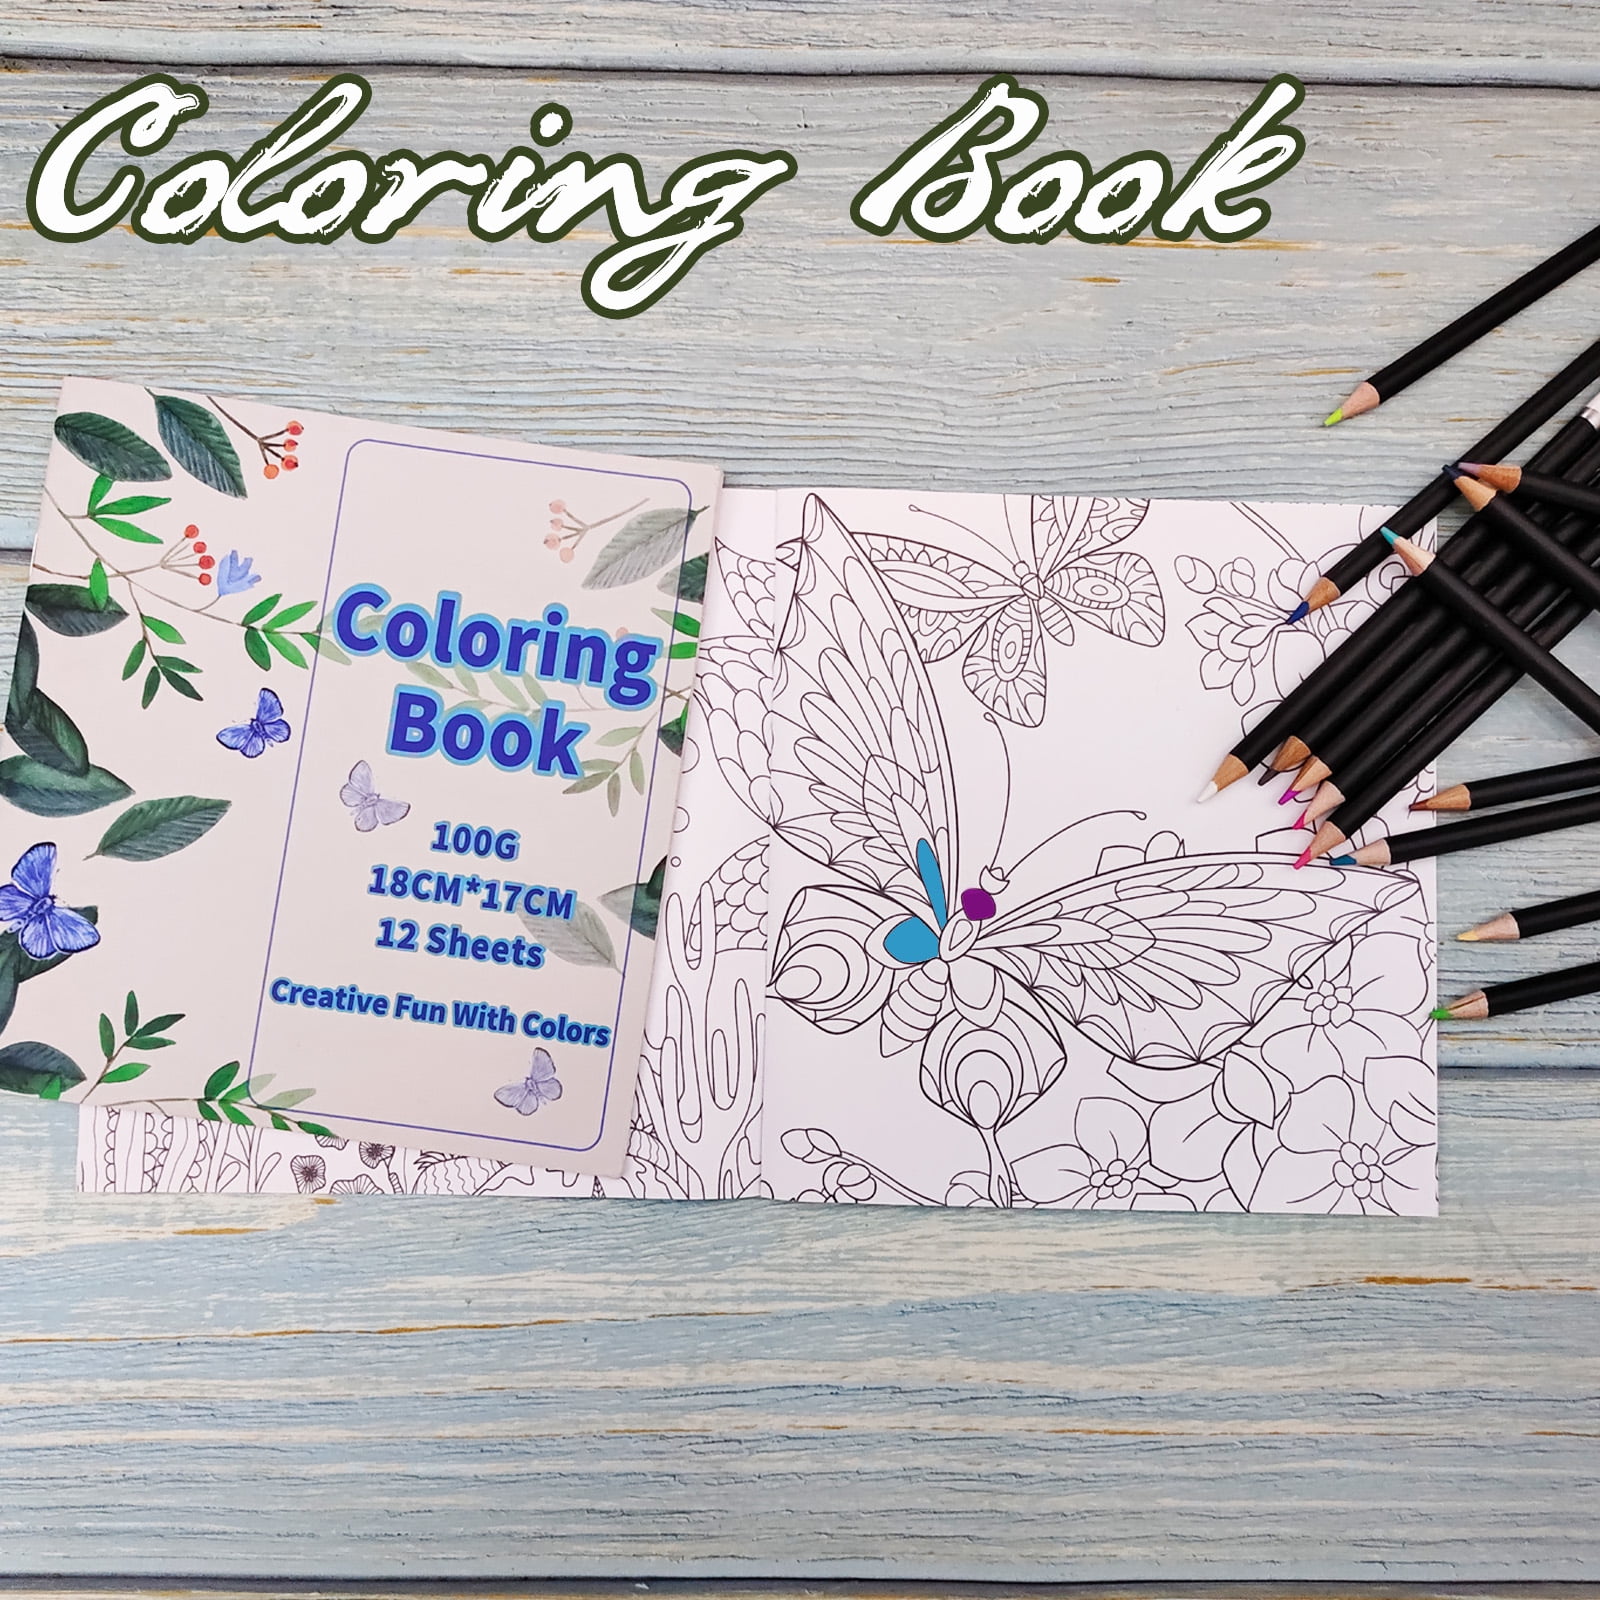 48 Pro Colored Coloring Pencils Adult Coloring Books, Drawing, Bible Study,  Journaling, Planner, Diary Colored Pencil Artist Set, Tin Case 